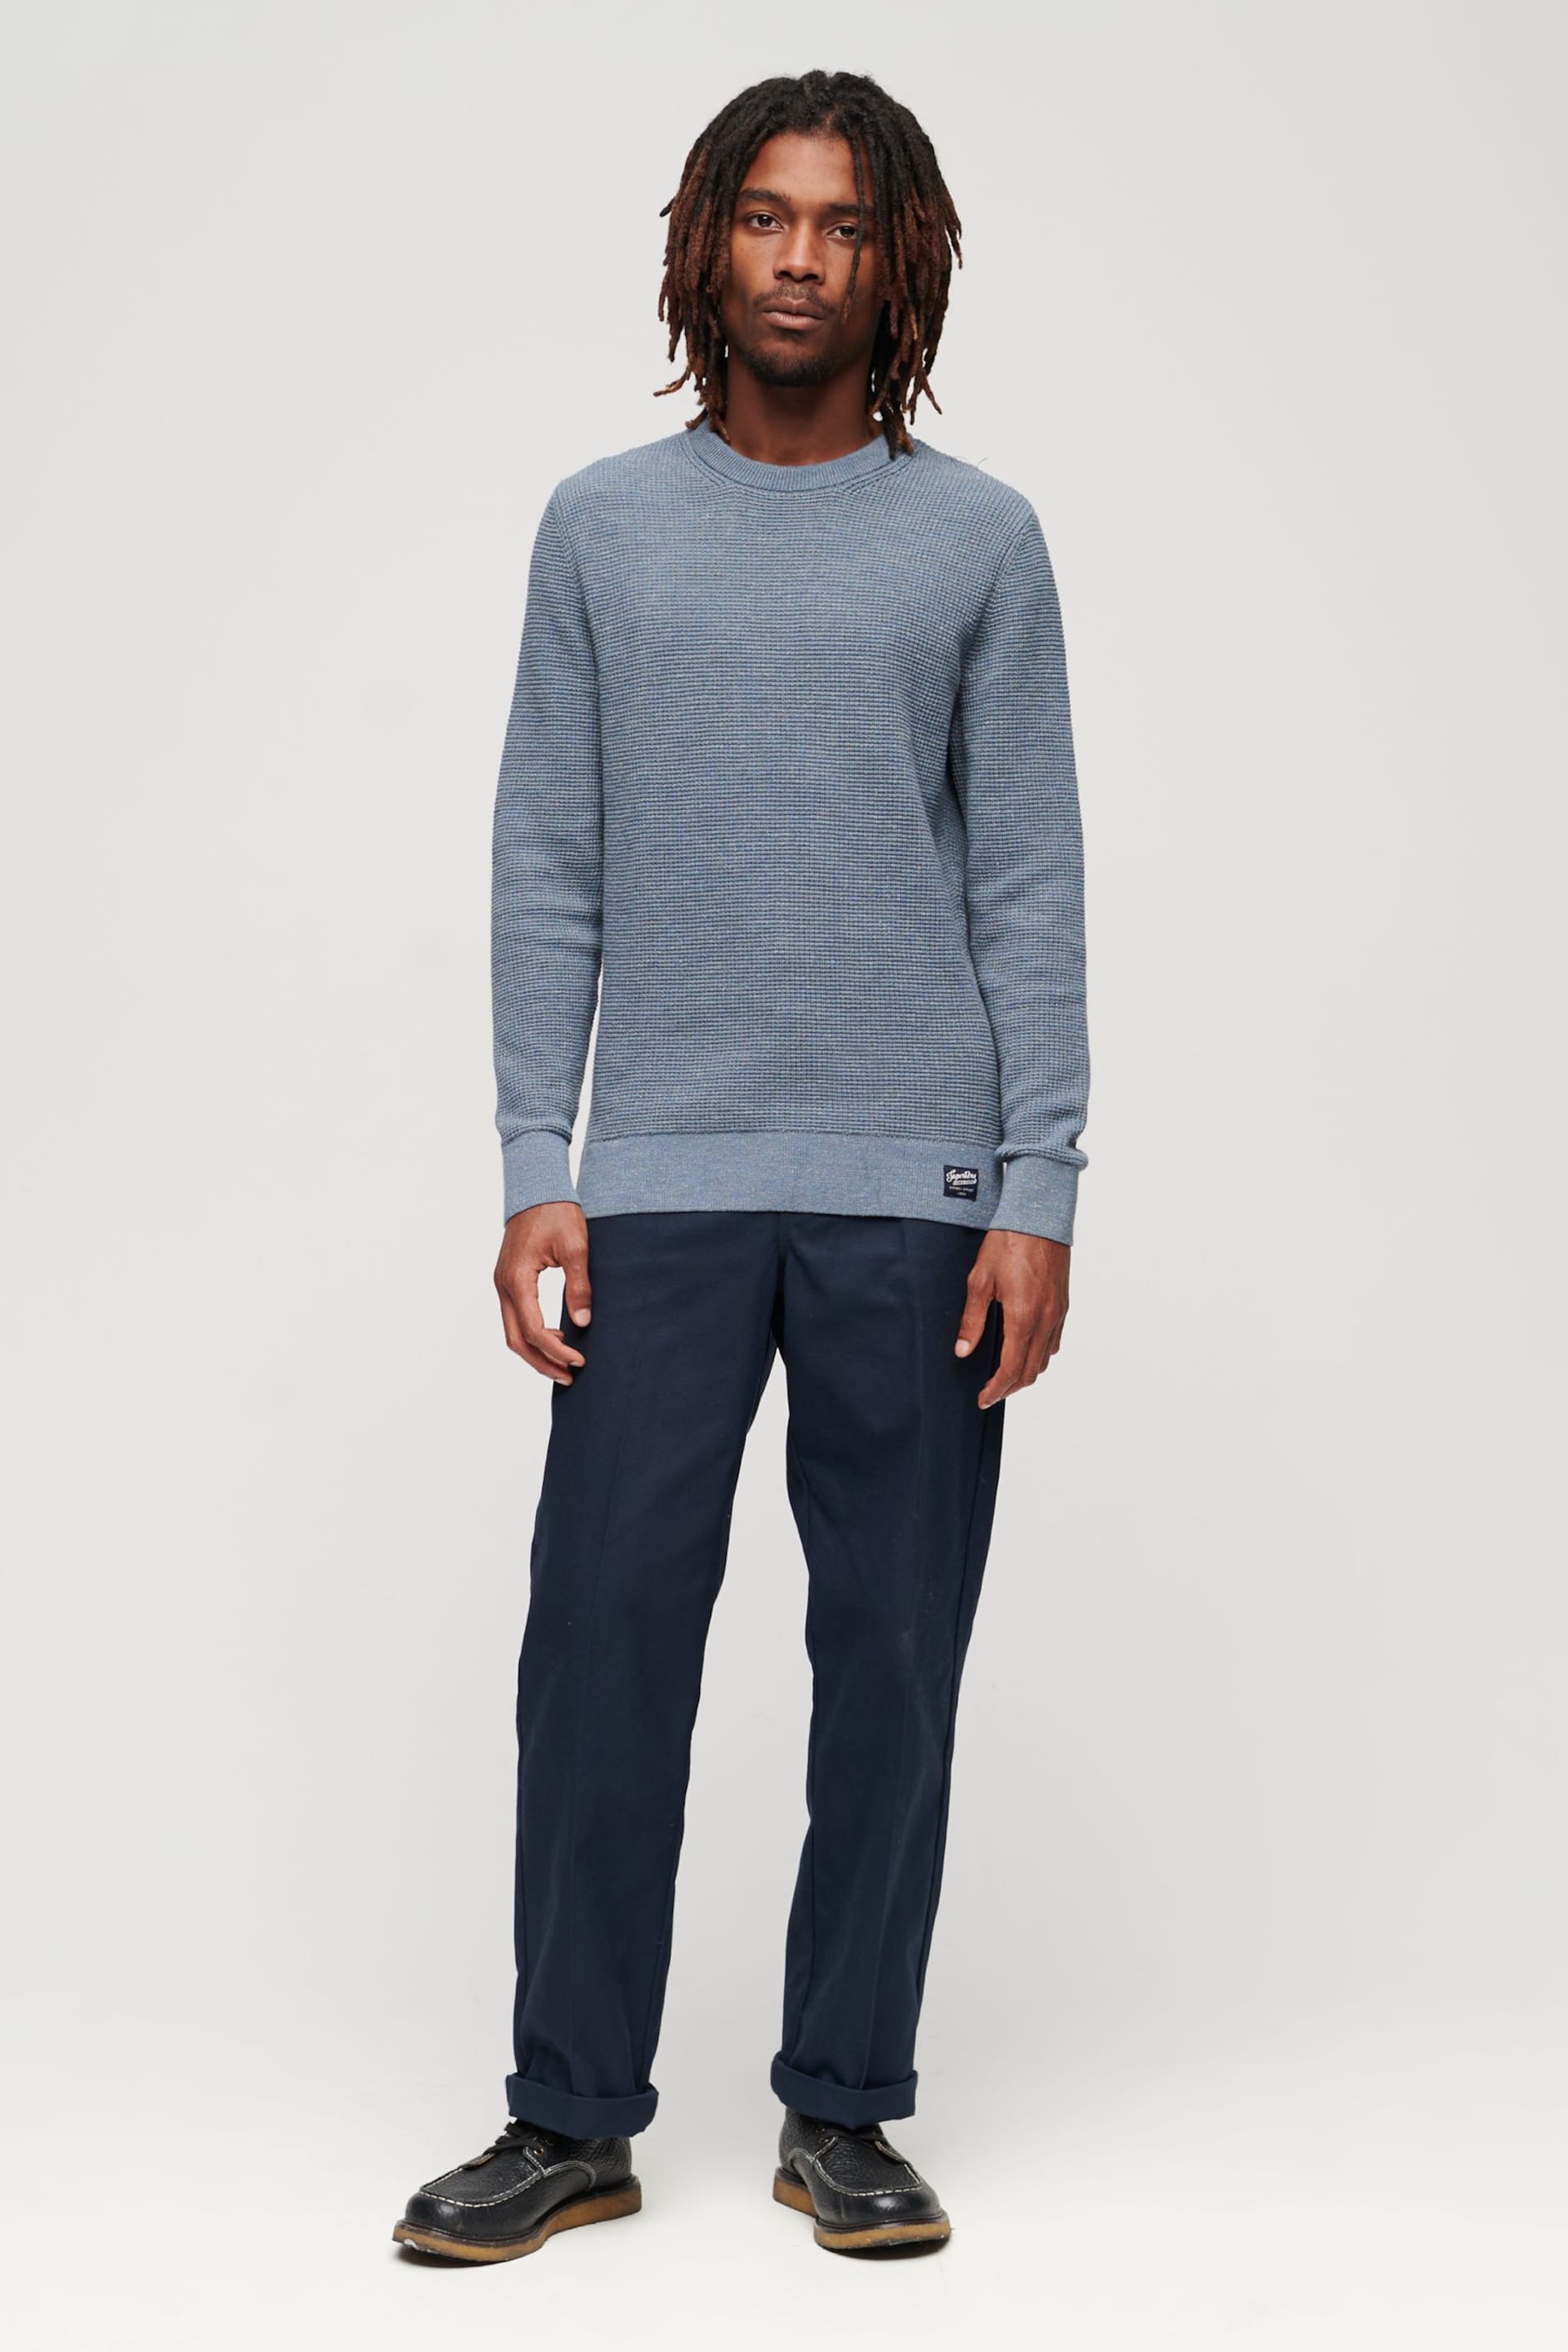 Superdry Blue Textured Crew Knit Jumper - Image 2 of 3